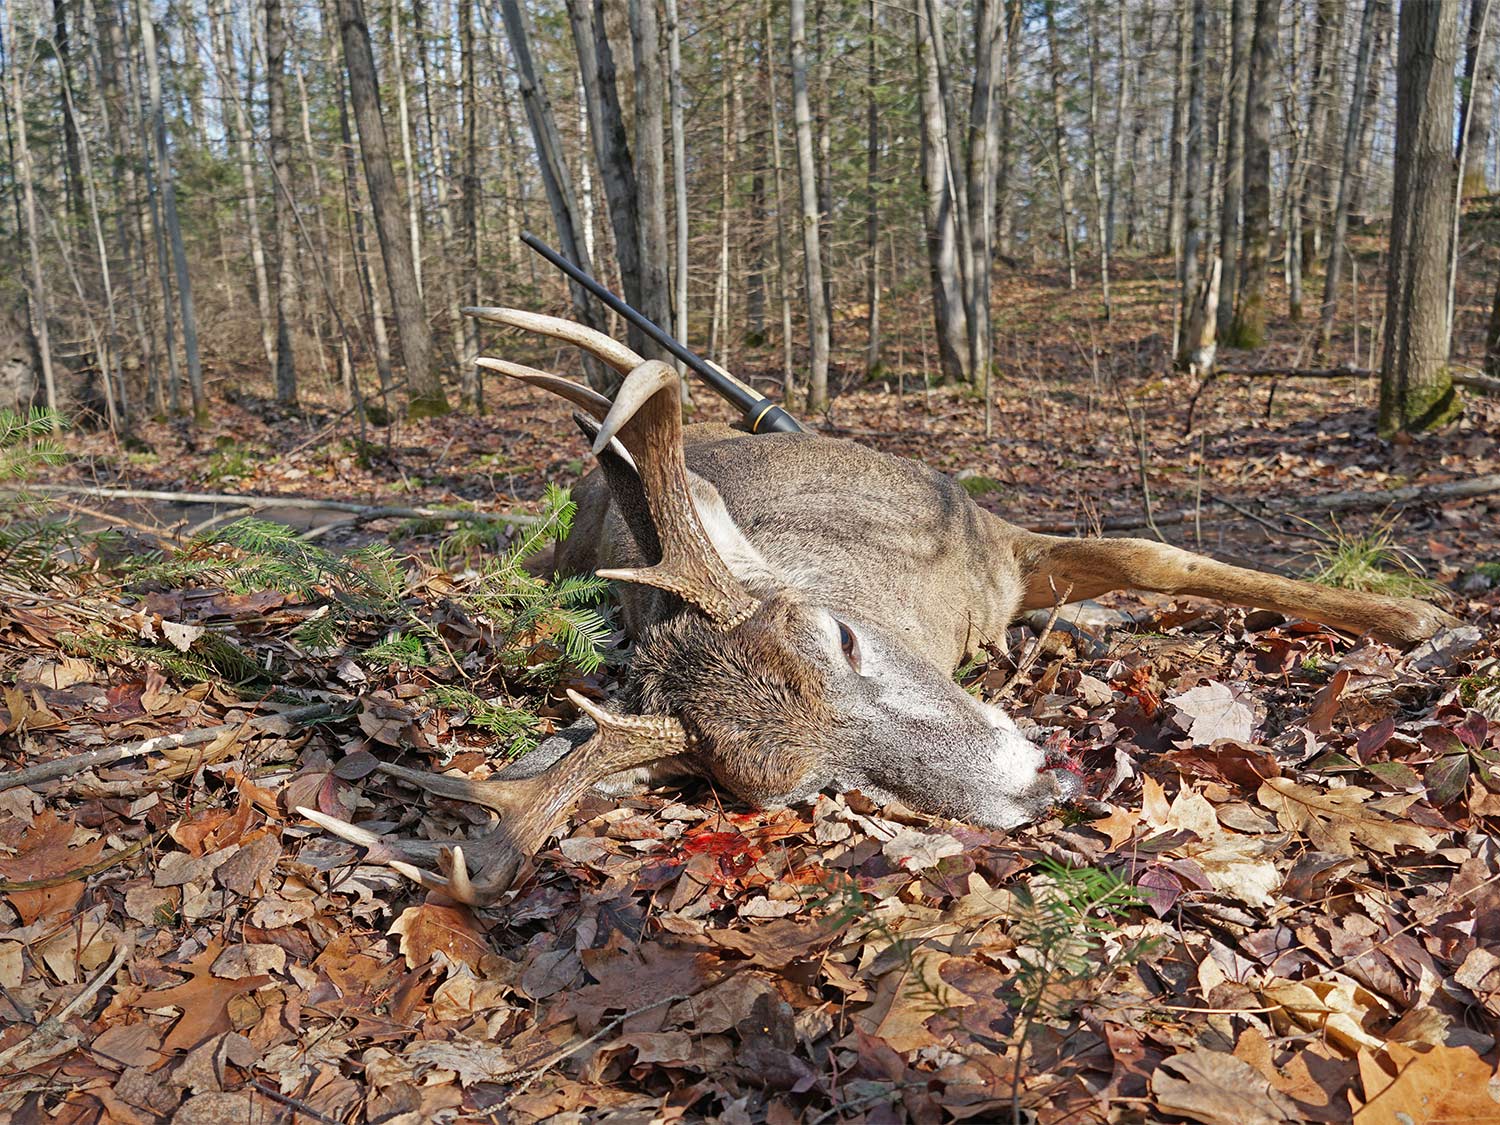 A dead whitetail deer on the ground in the leaves in the woods.